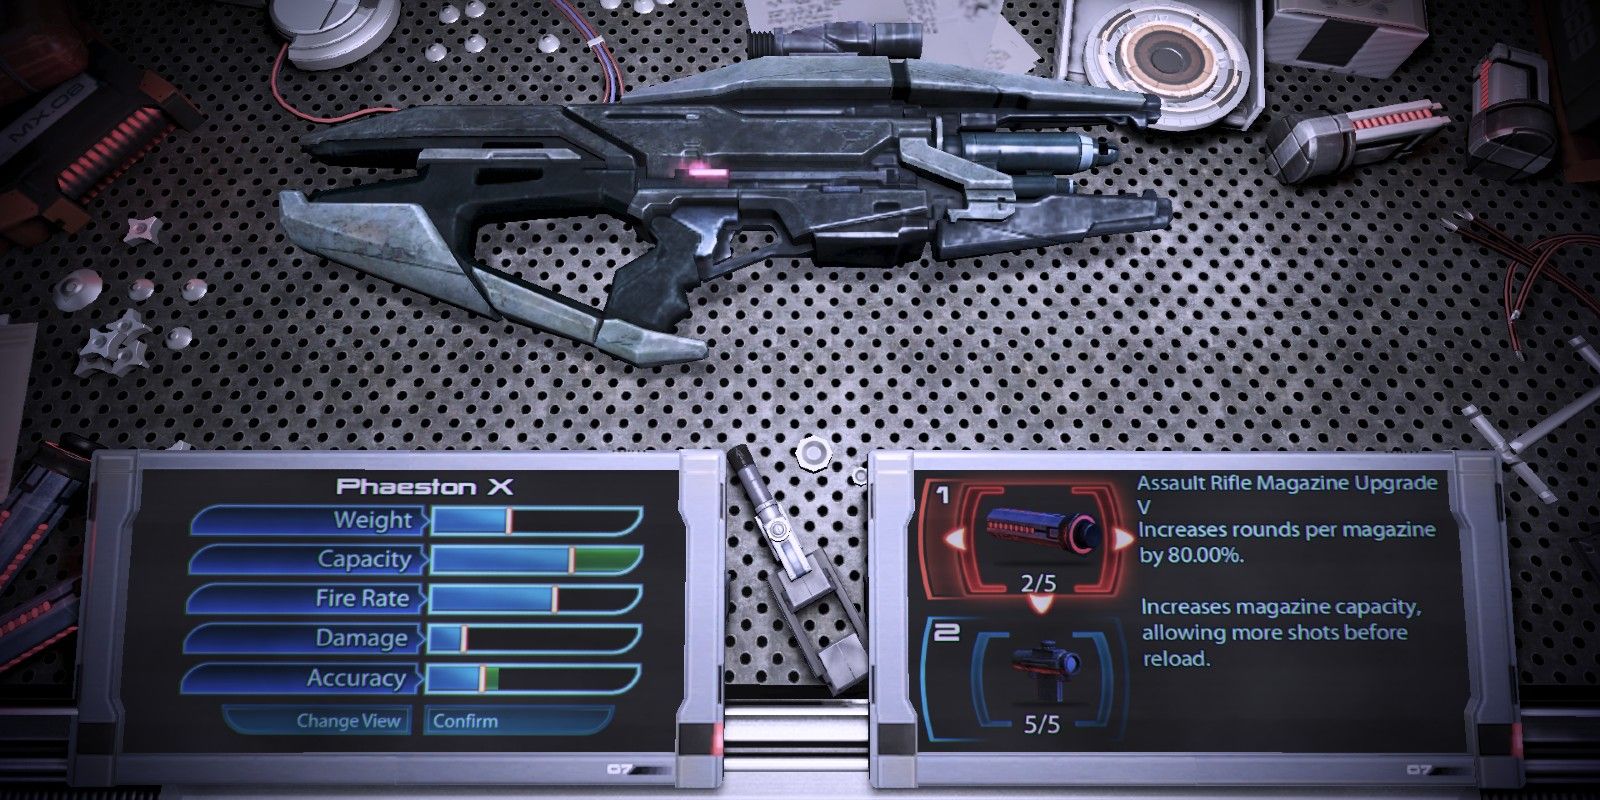 Players can purchase or unlock upgrades to mod their weapons in Mass Effect 3